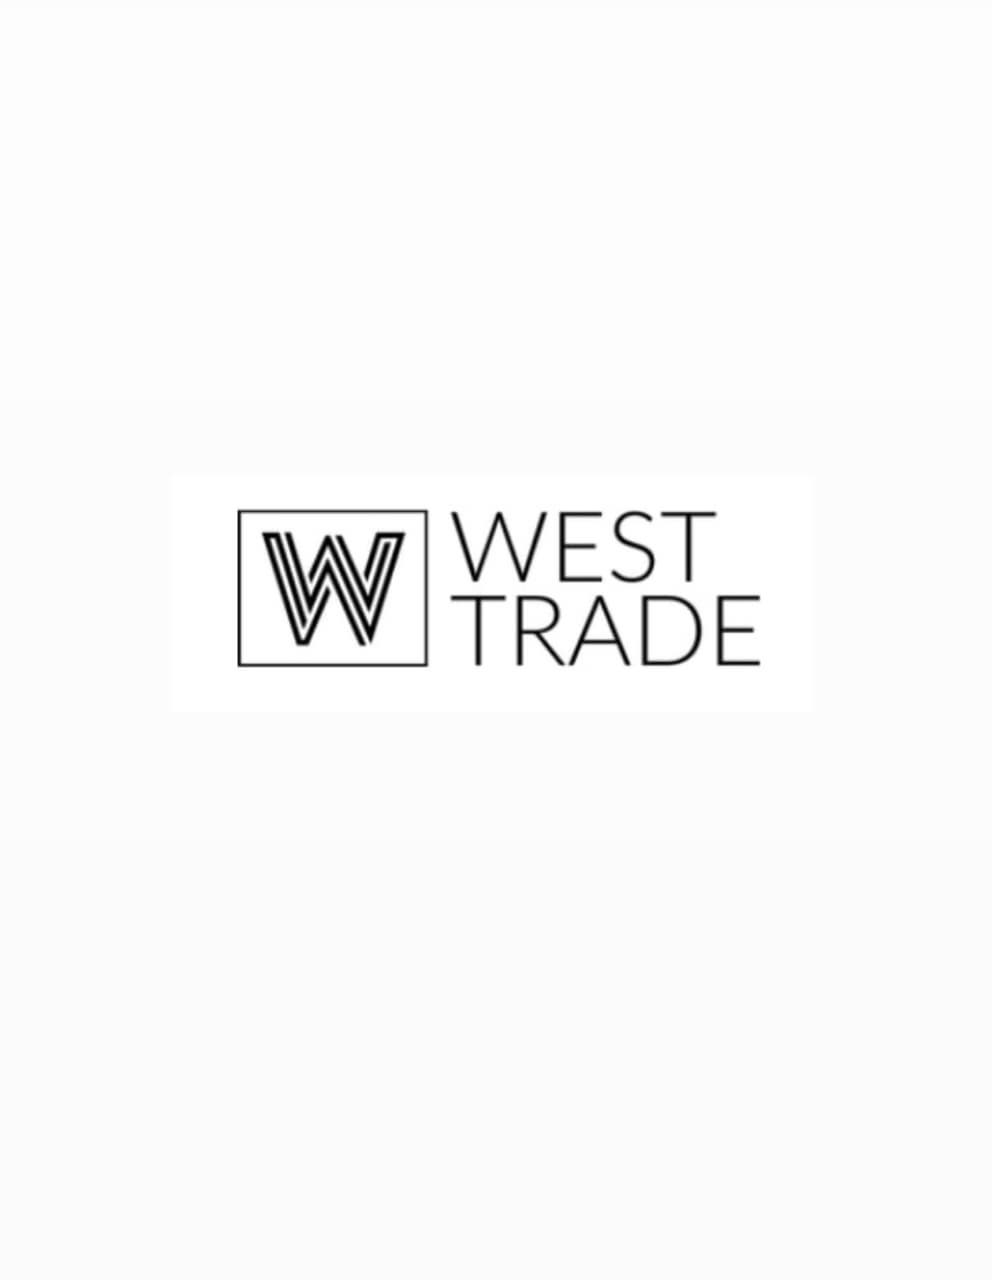 West Trade